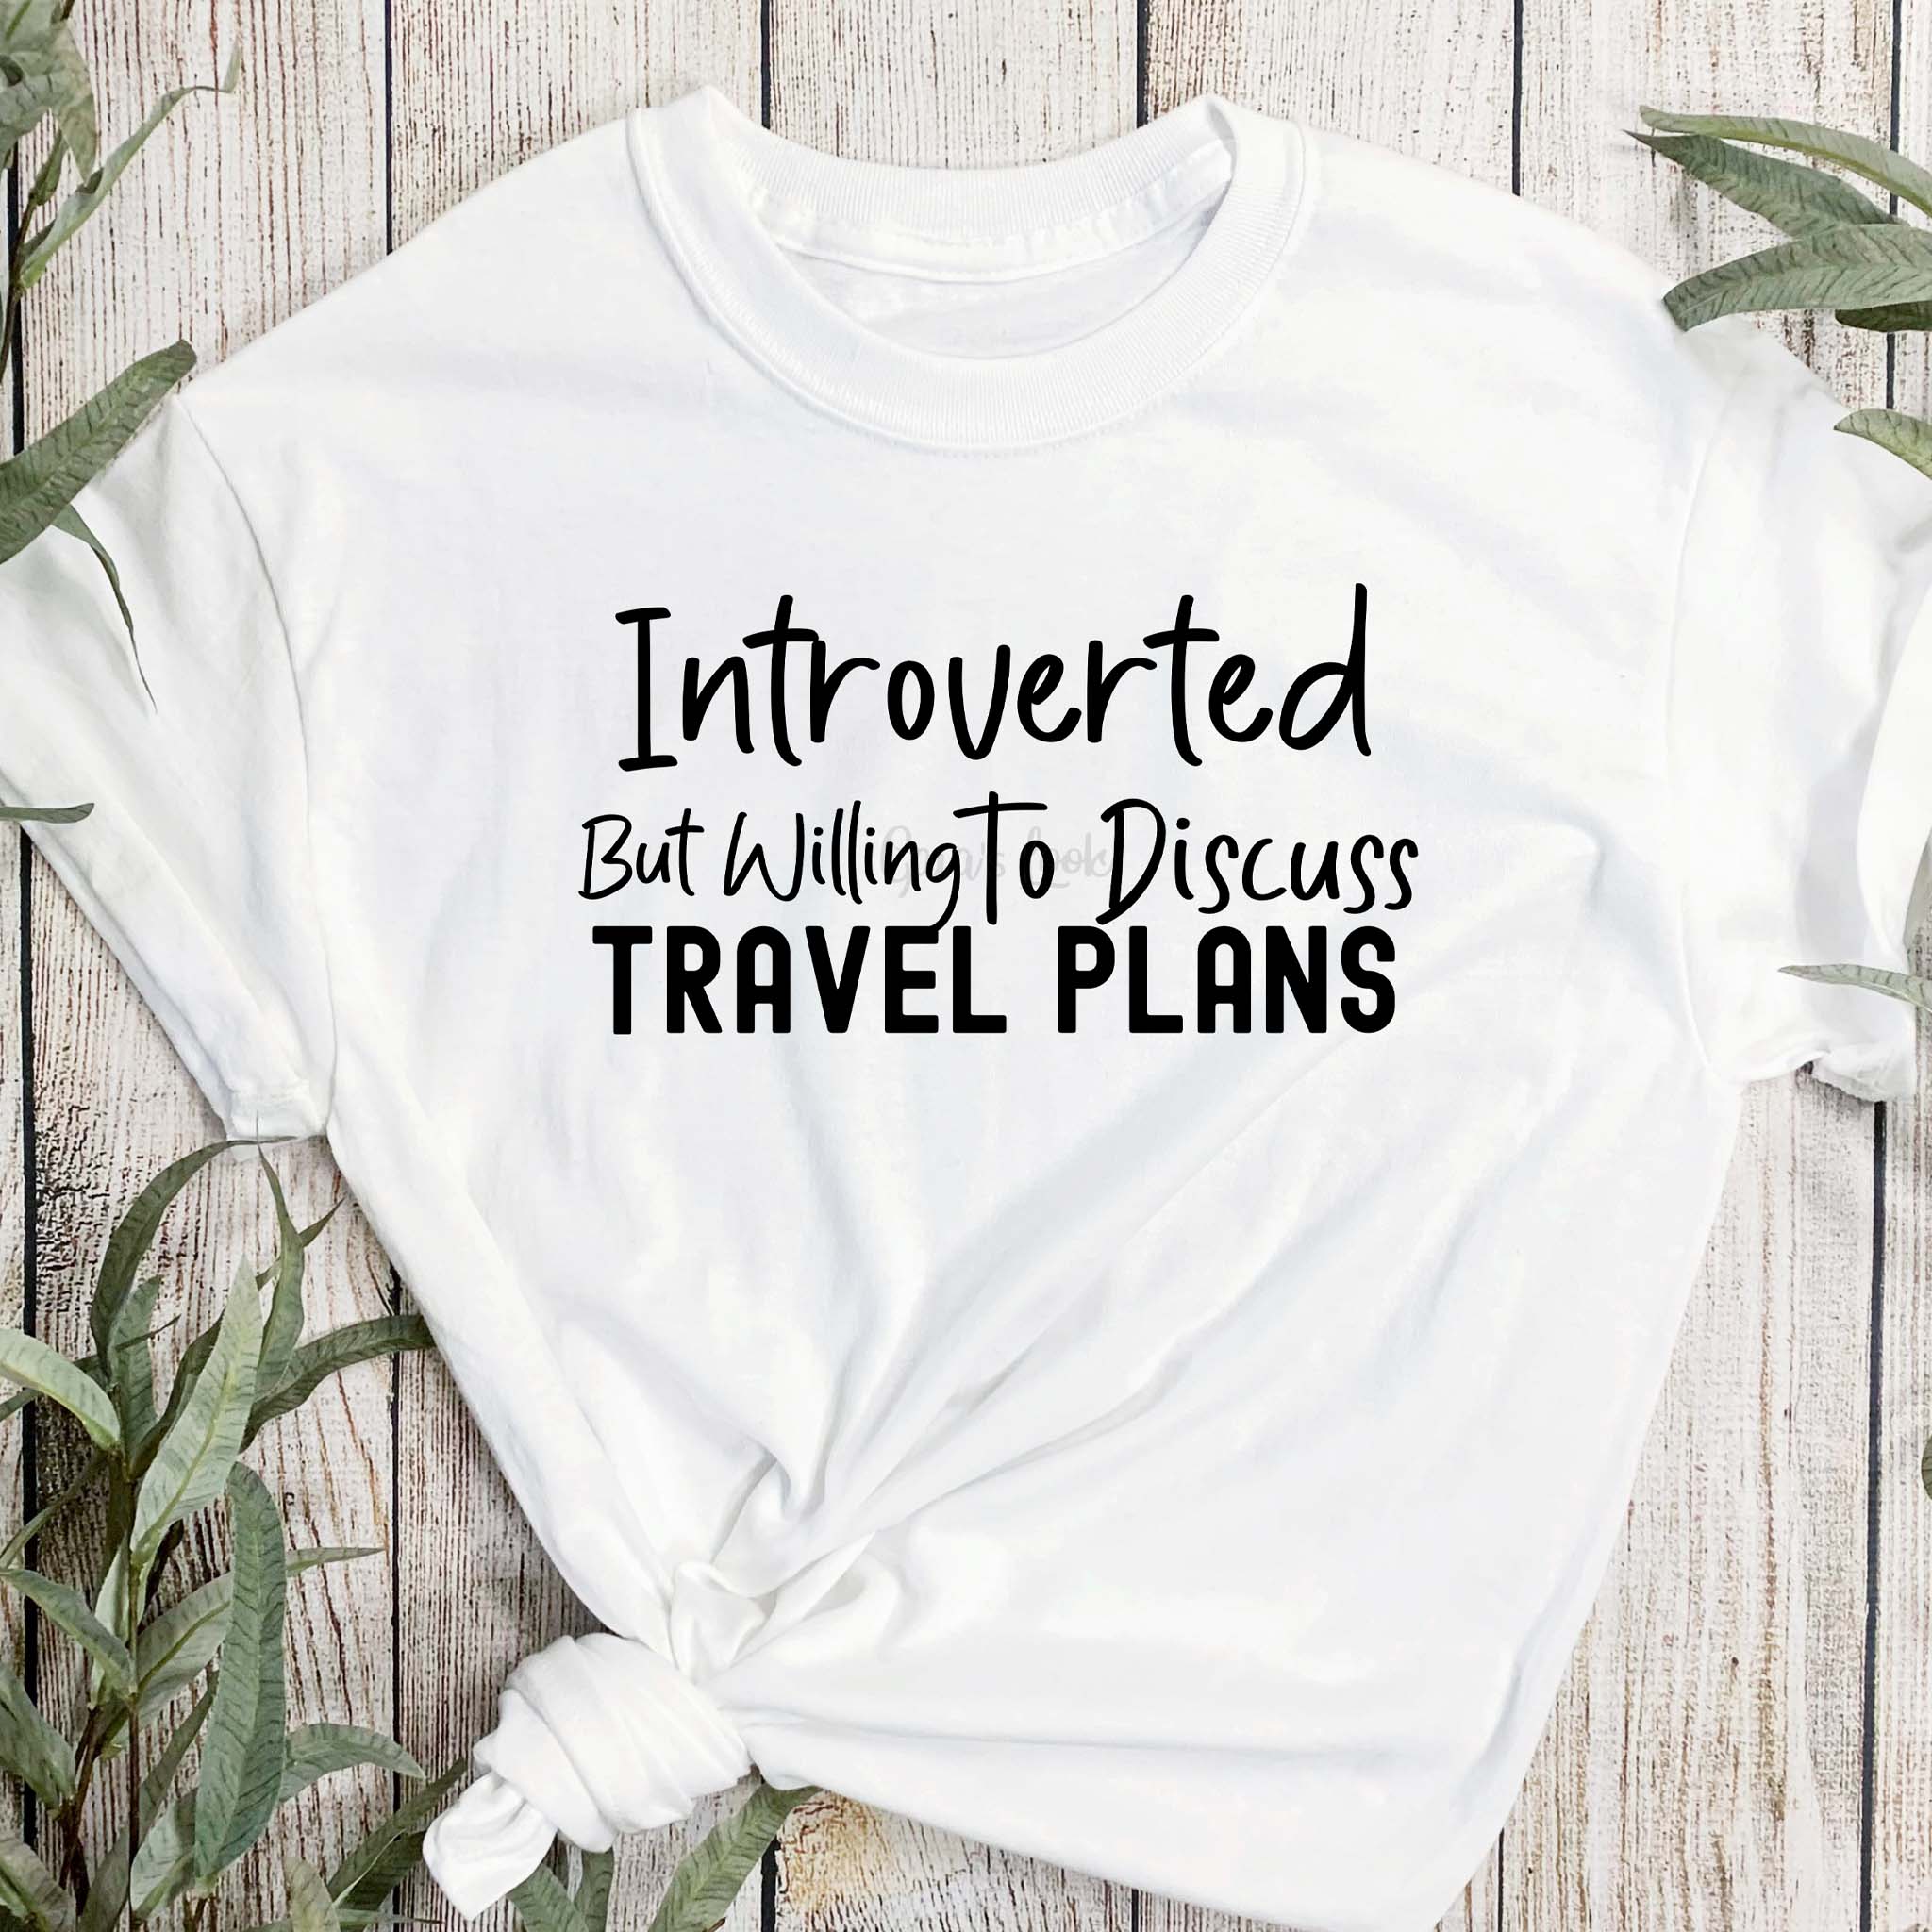 Introverted But Willing To Discuss Travel Plans T Shirt